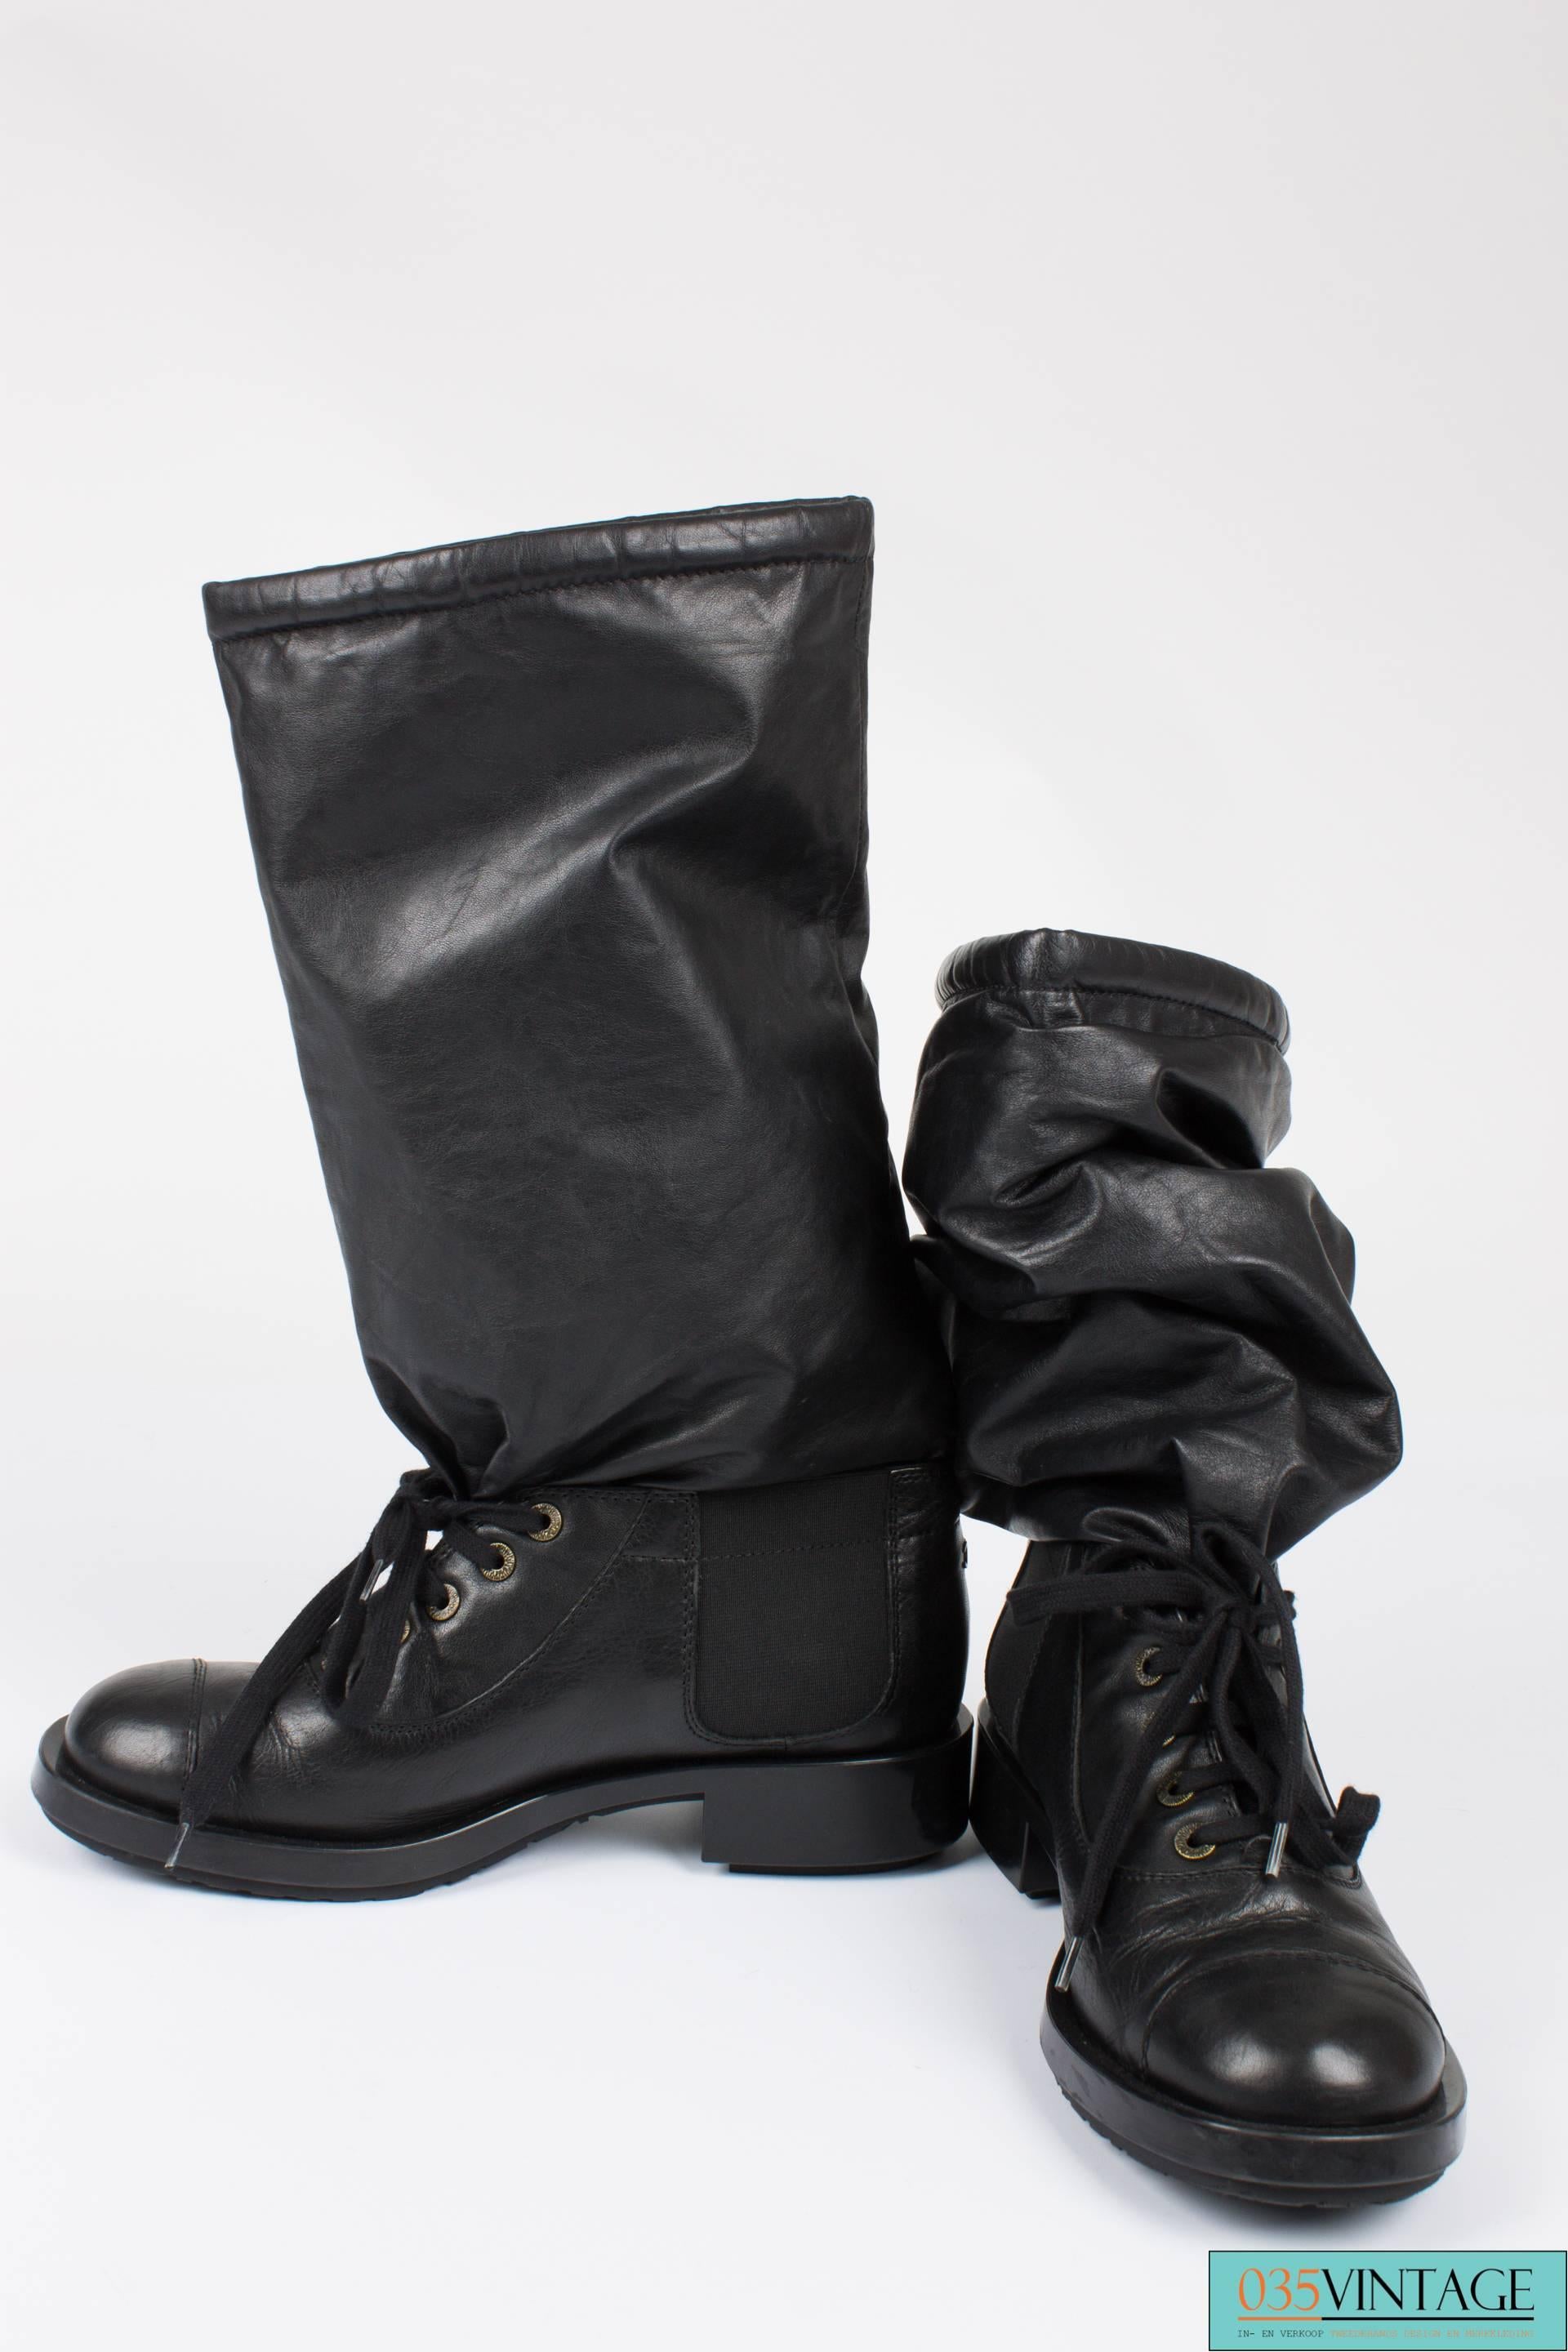 Slouchy combat boots by Chanel, seen on the Runway of 2011. How cool are these?!

A sturdy sole with a high gloss finish on the sides. Laces at the front and a piece of elastic on both sides of the ankle. A round reinforced toe. The heel measures